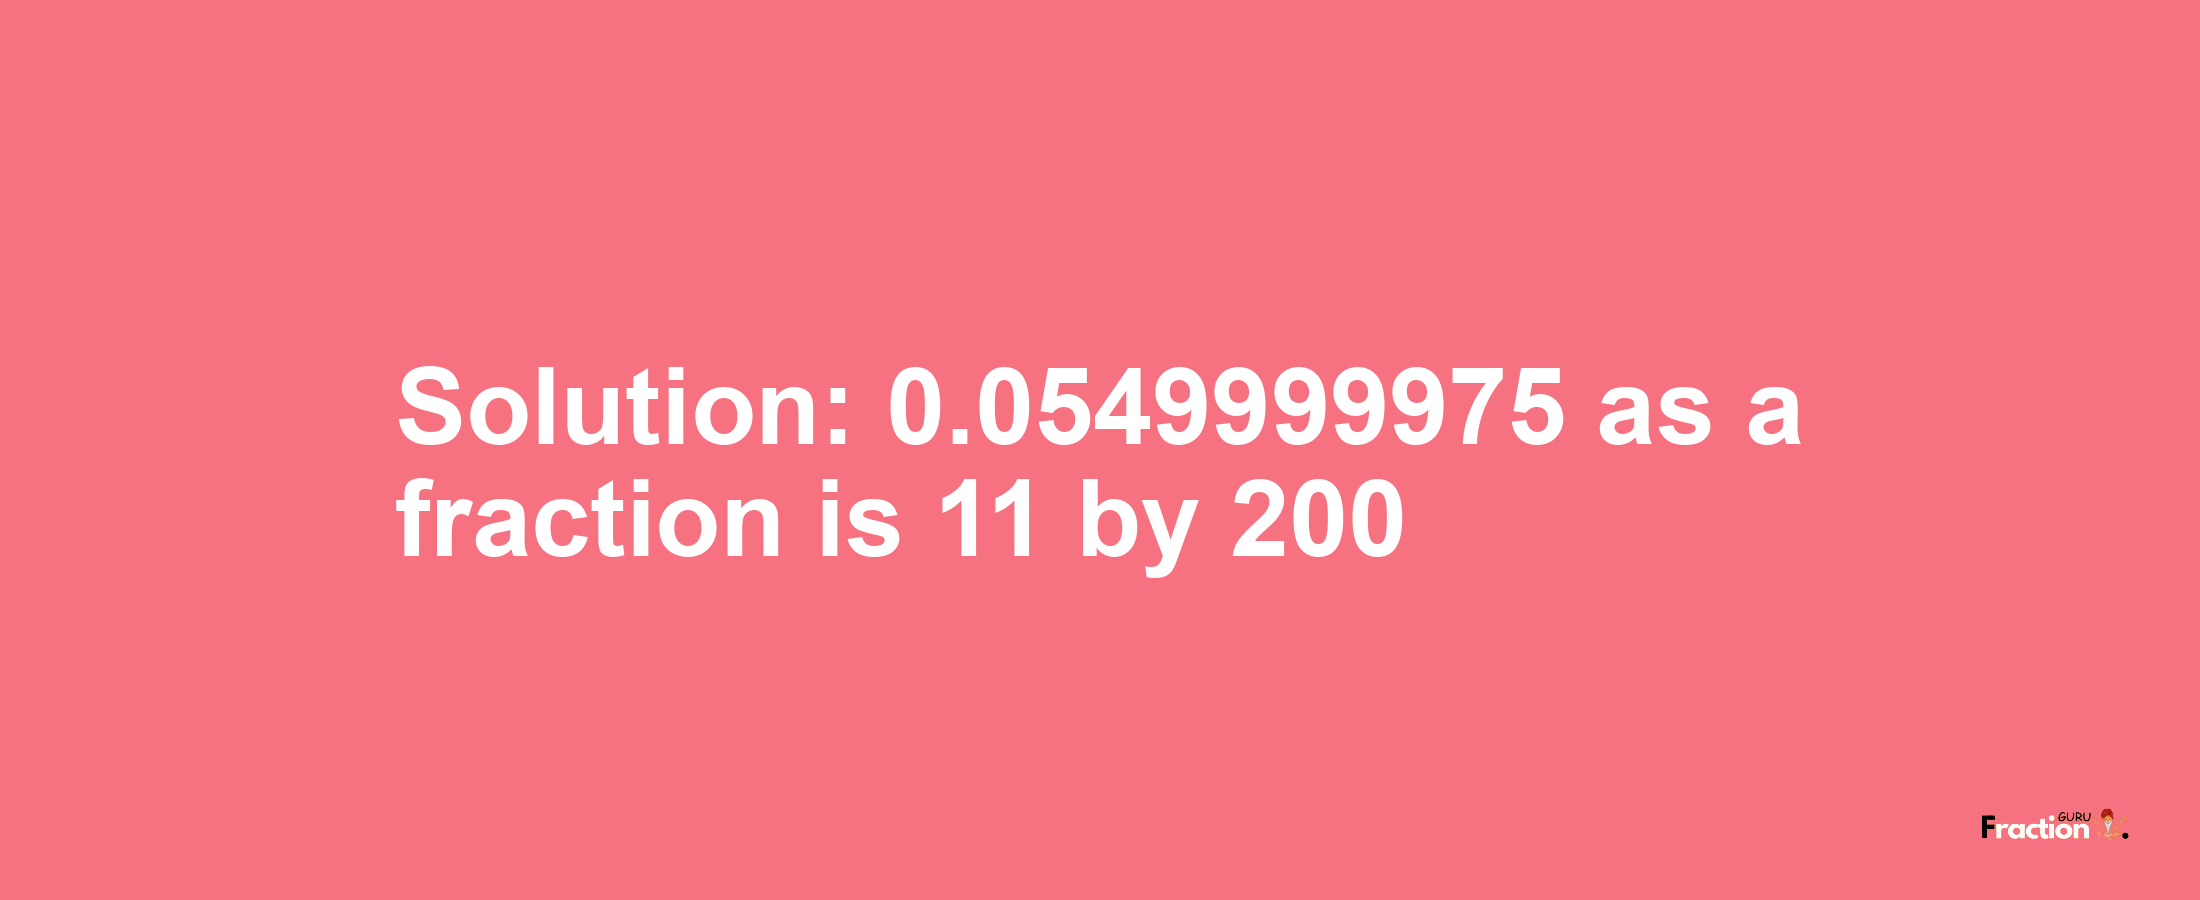 Solution:0.0549999975 as a fraction is 11/200